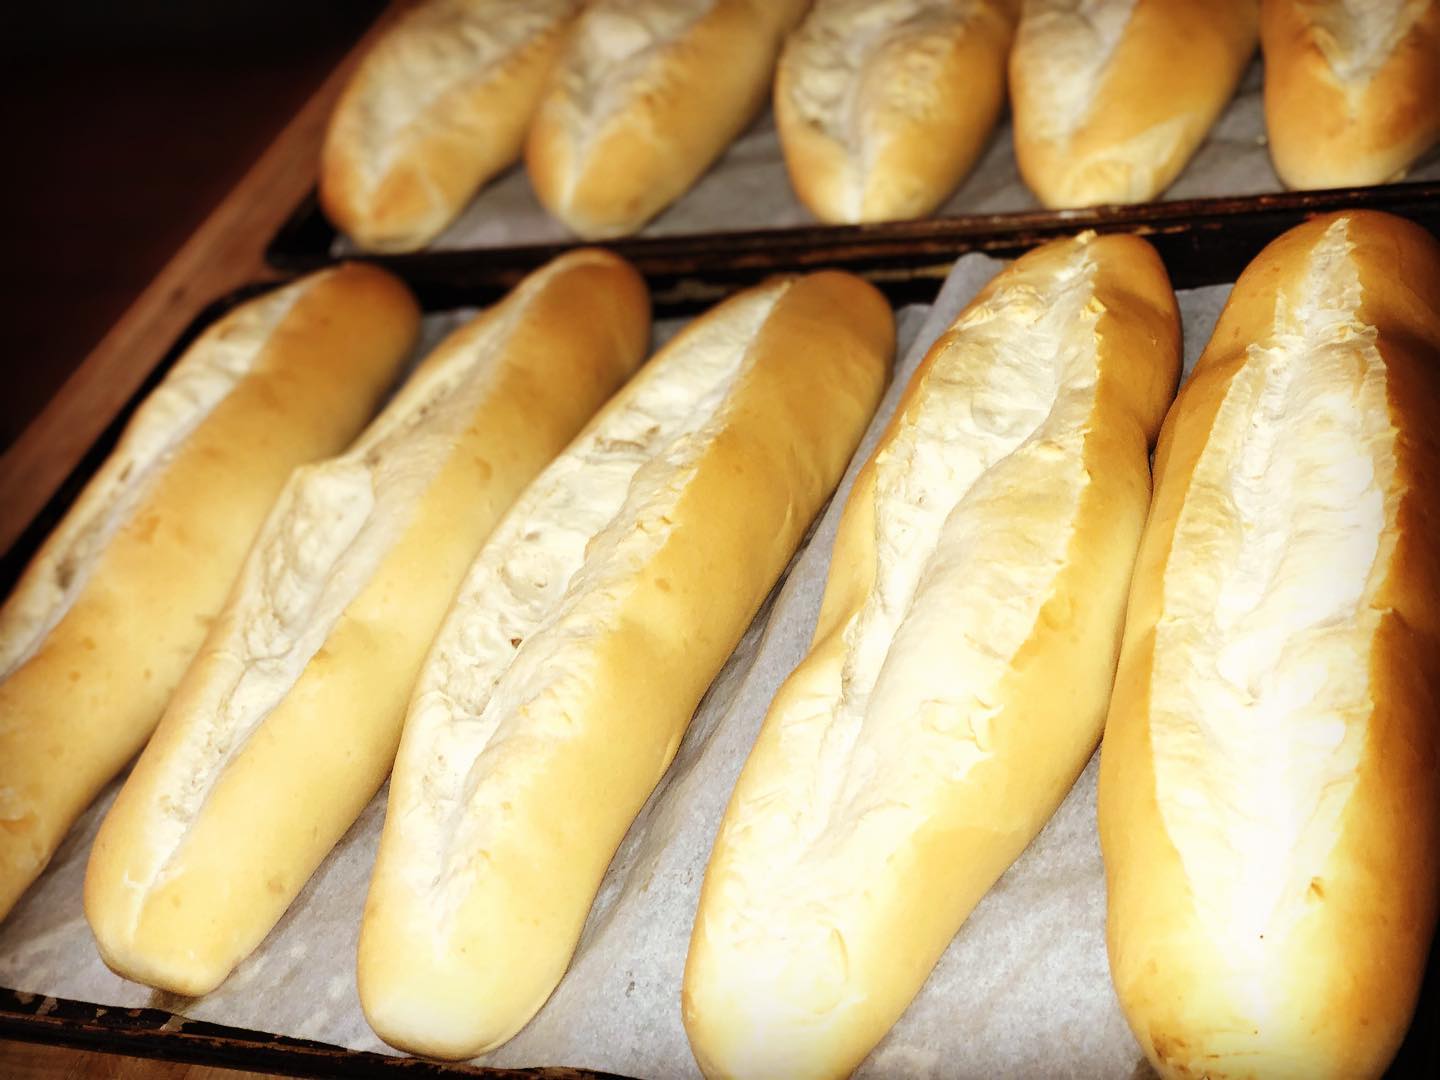 Freshly baked baguettes on a tray lined with parchment paper, showing a golden crust and soft texture.